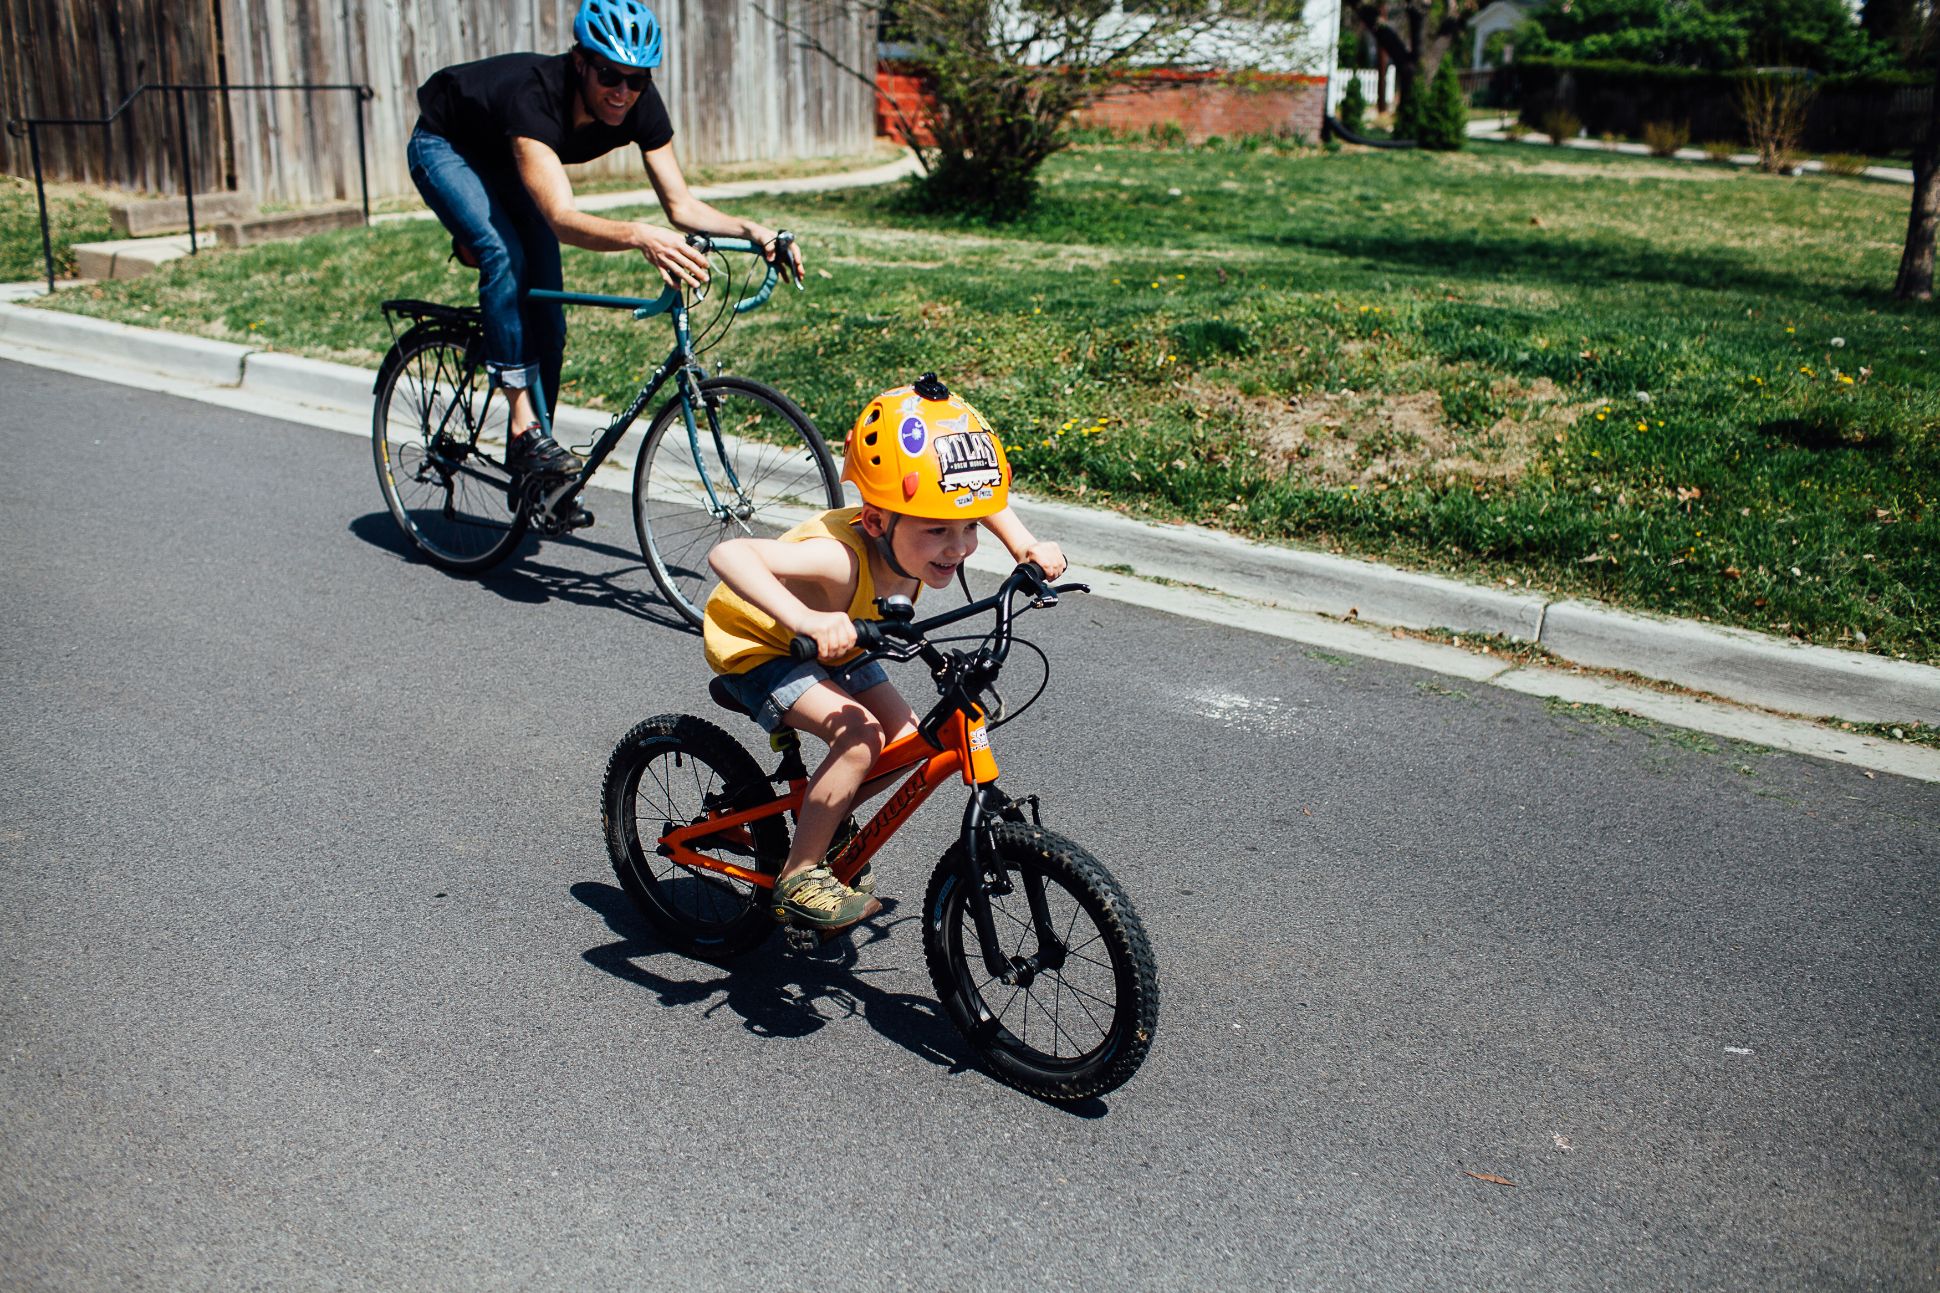 Parent and child riding bikes together